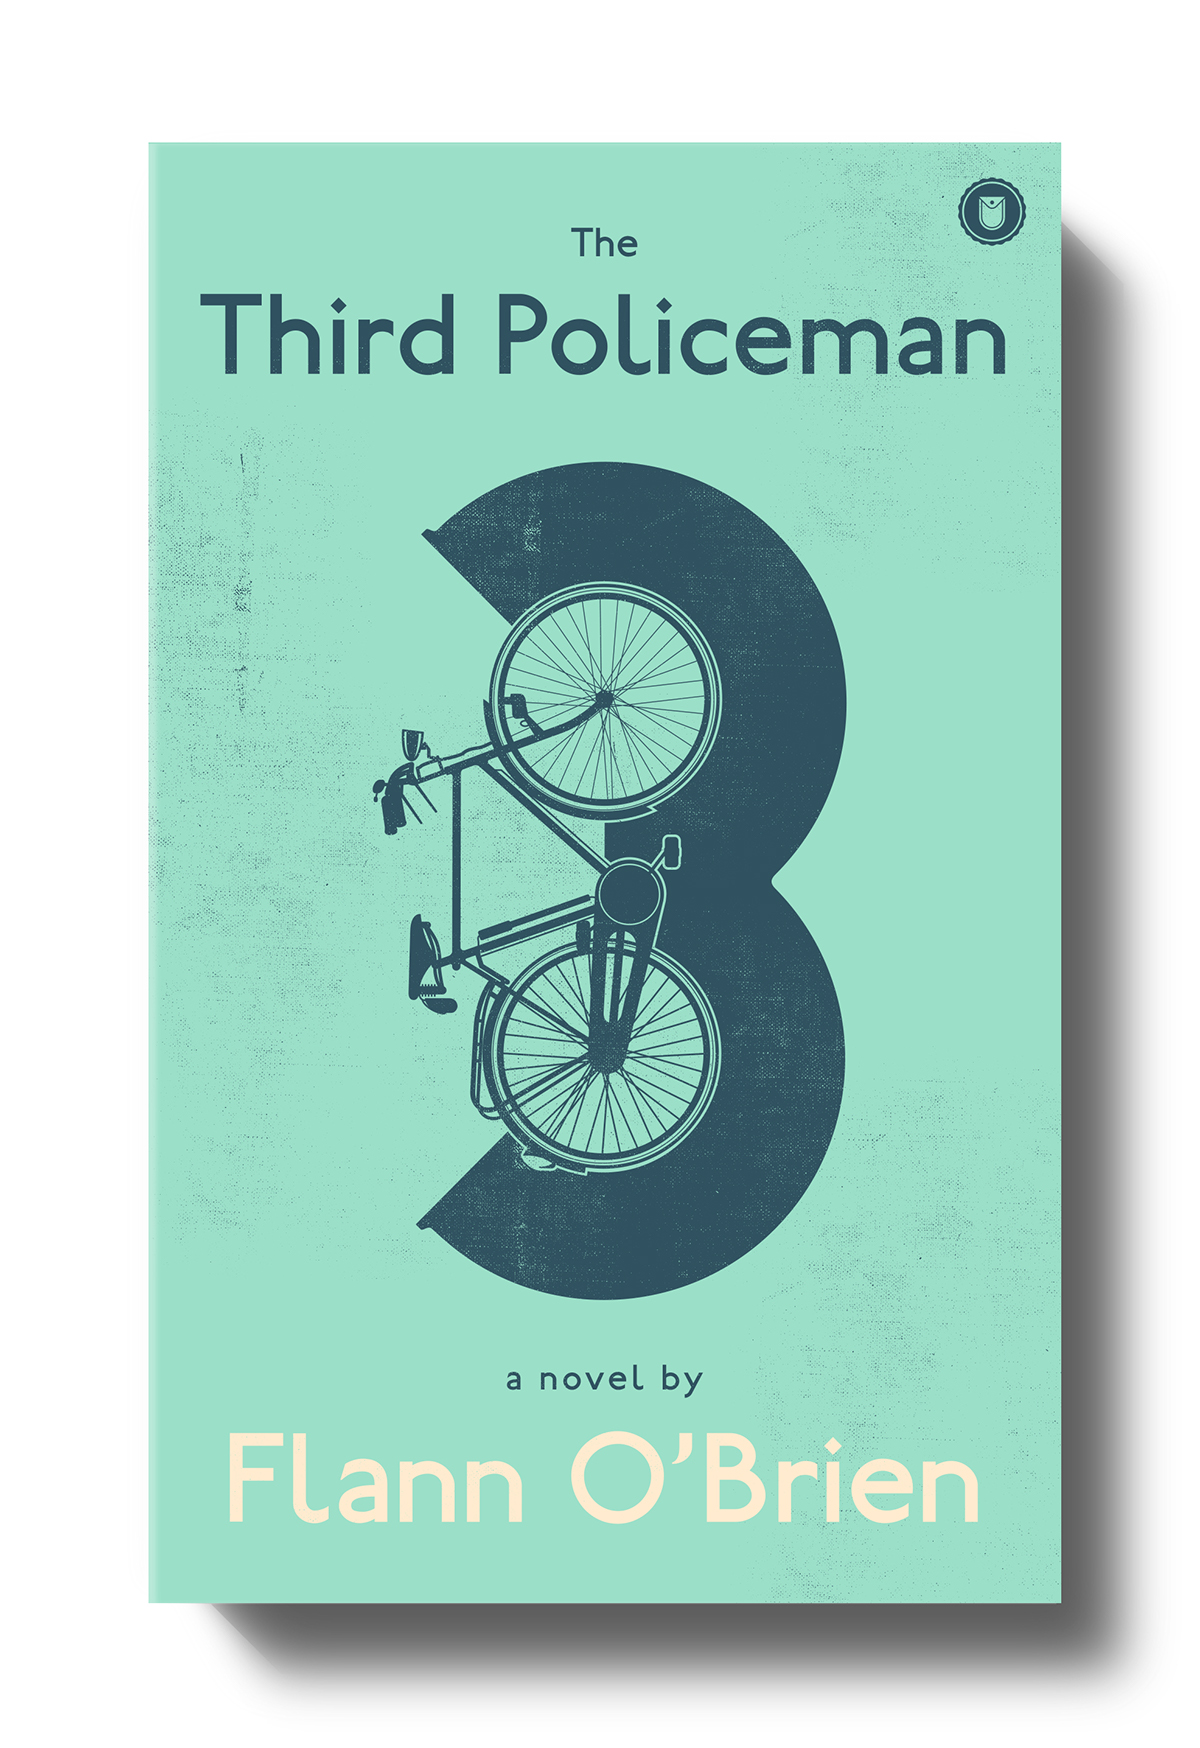 book cover book cover Flann O'Brien Third Policeman Bicycle three numbers